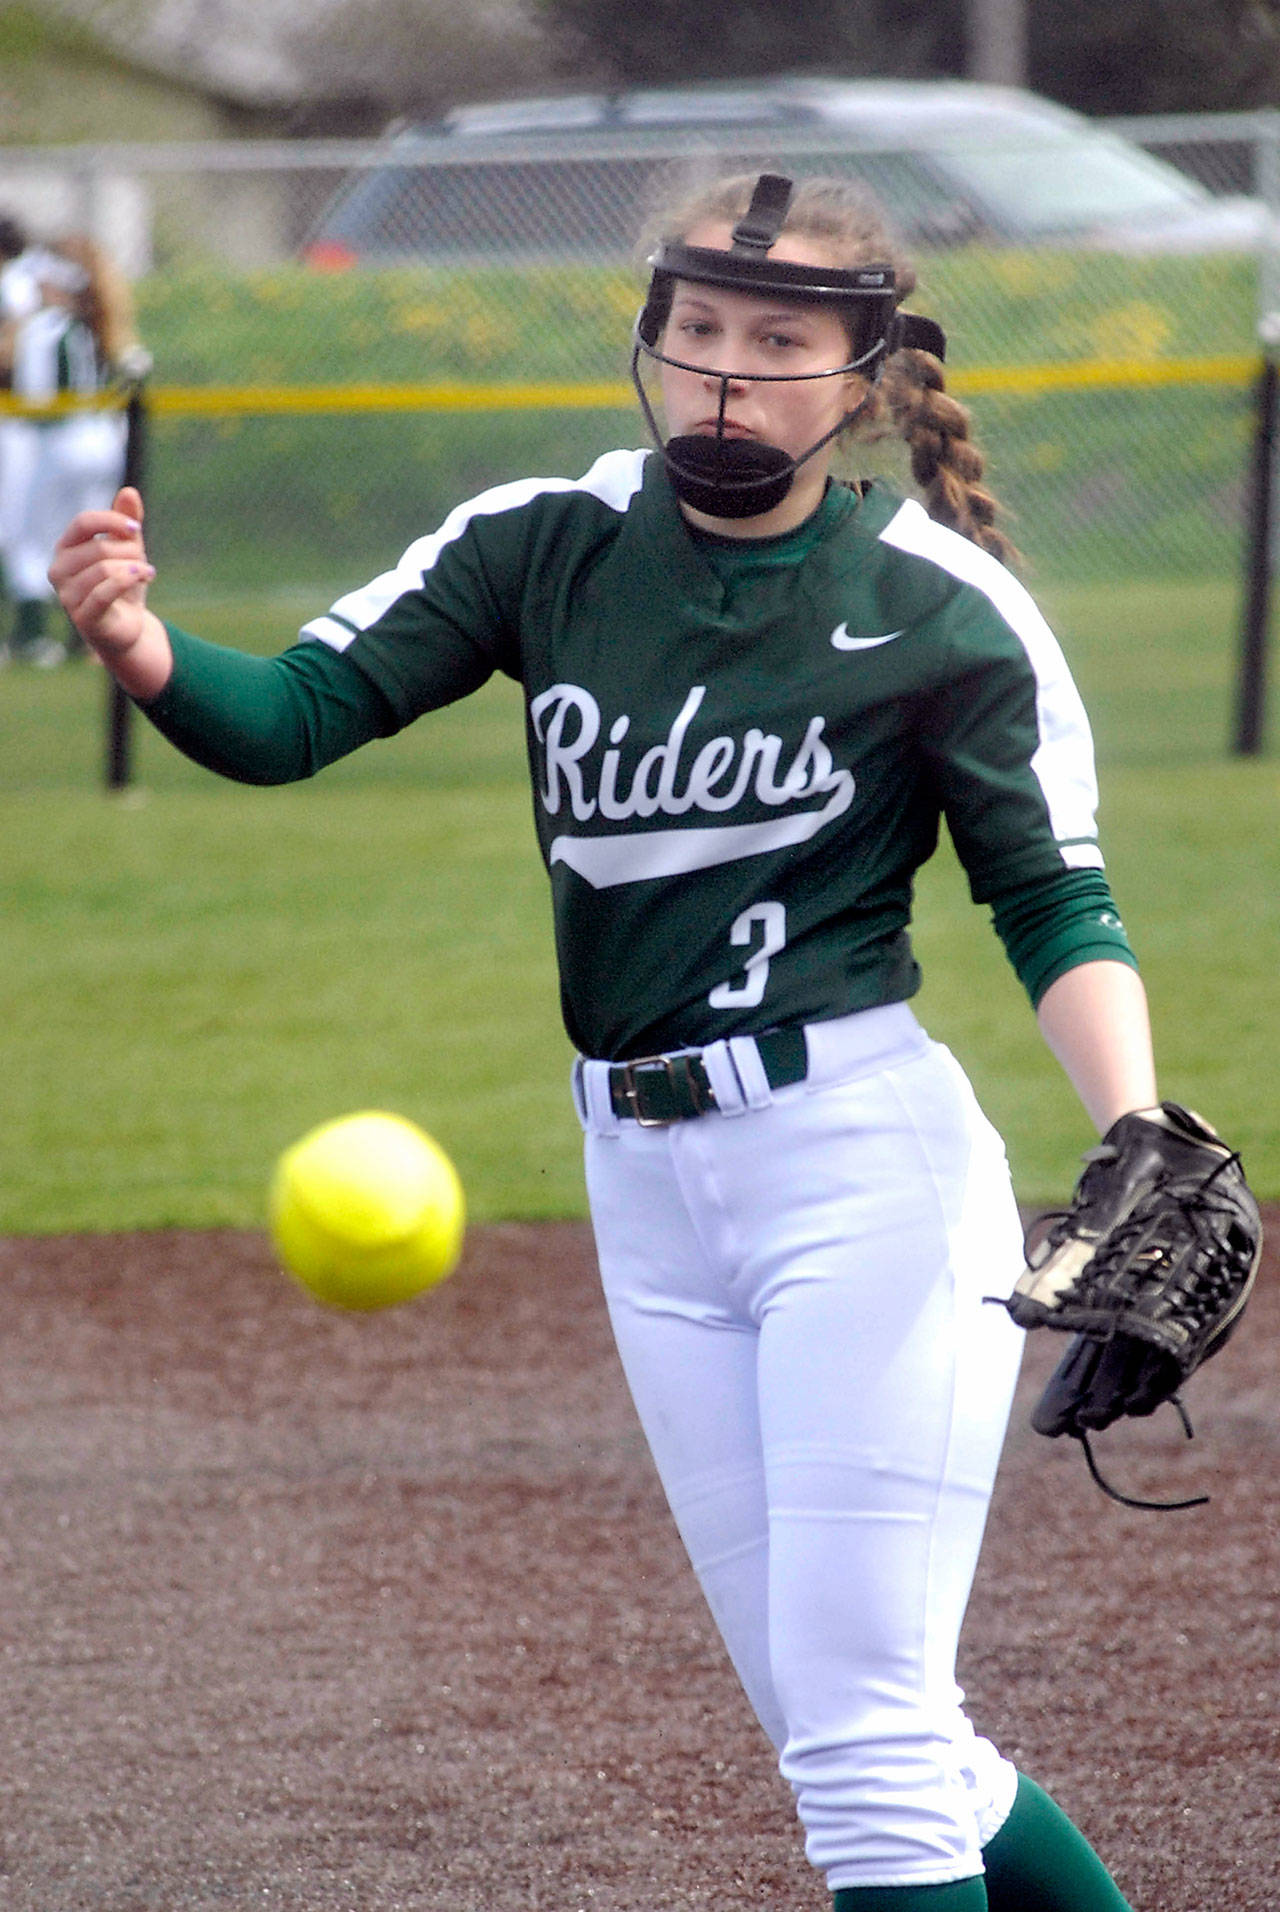 Keith Thorpe/Peninsula Daily News Port Angeles’ Hope O’Connor pitches in an April 14 game against White River at Billy Whiteshoes Memorial Park near Port Angeles.